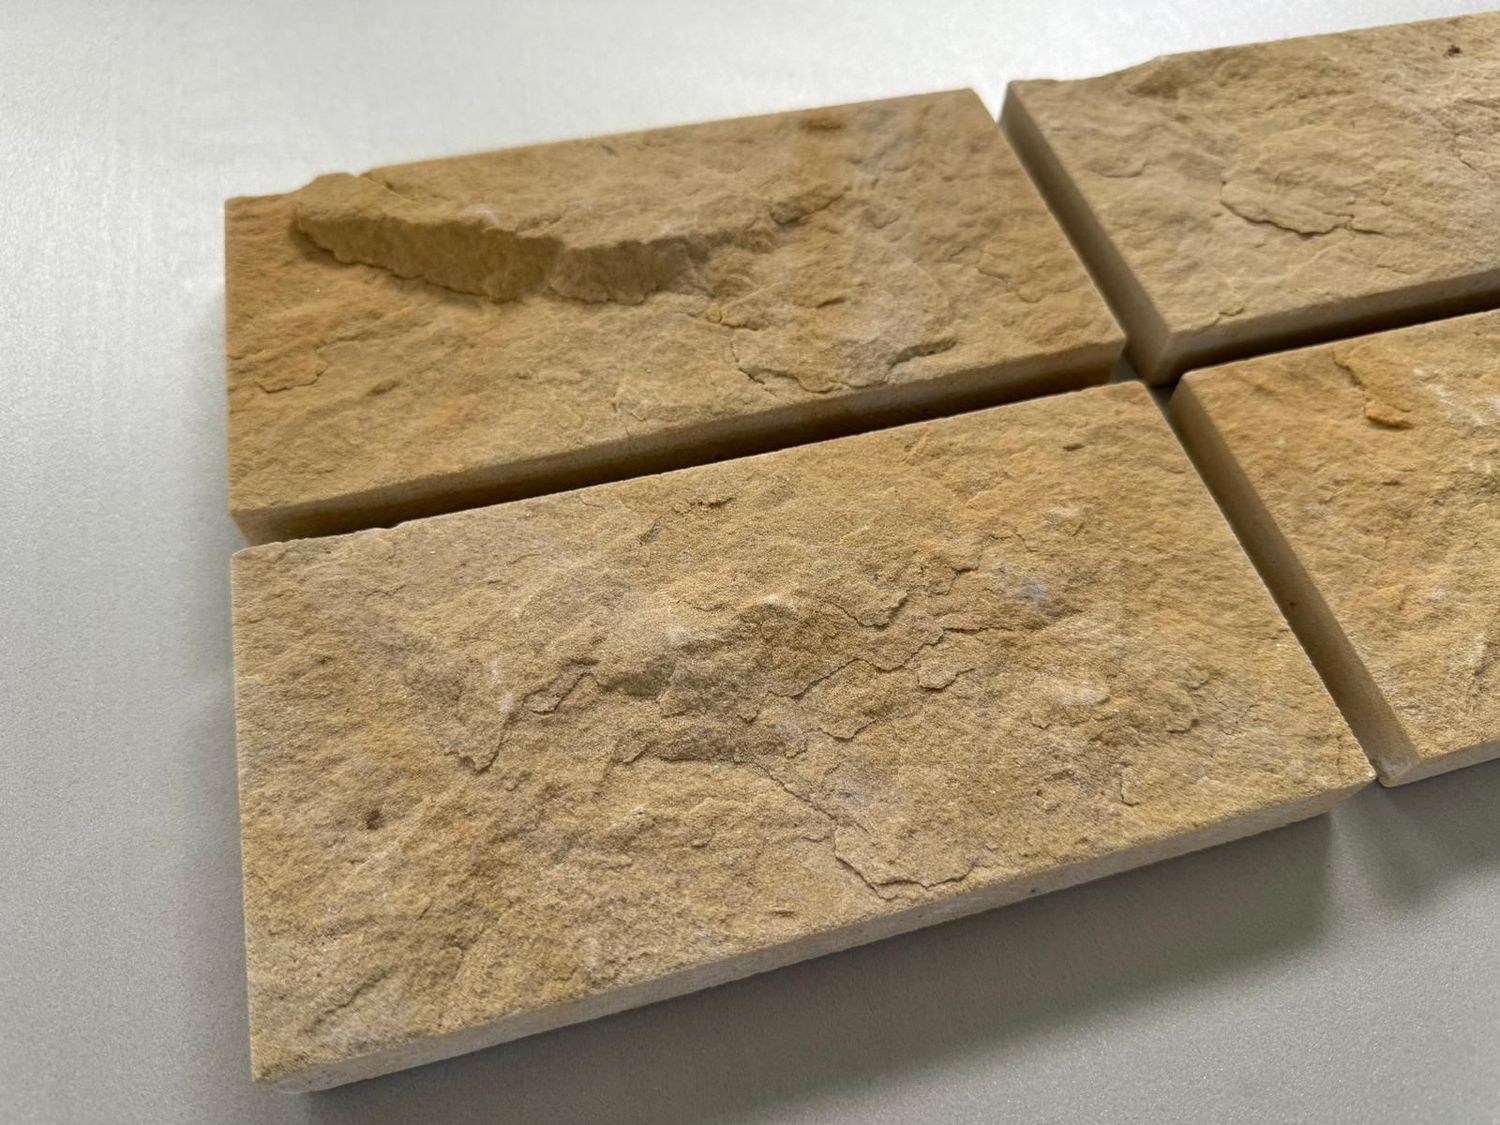 Pitched Face Coursed buff sandstone cladding slips - Sample